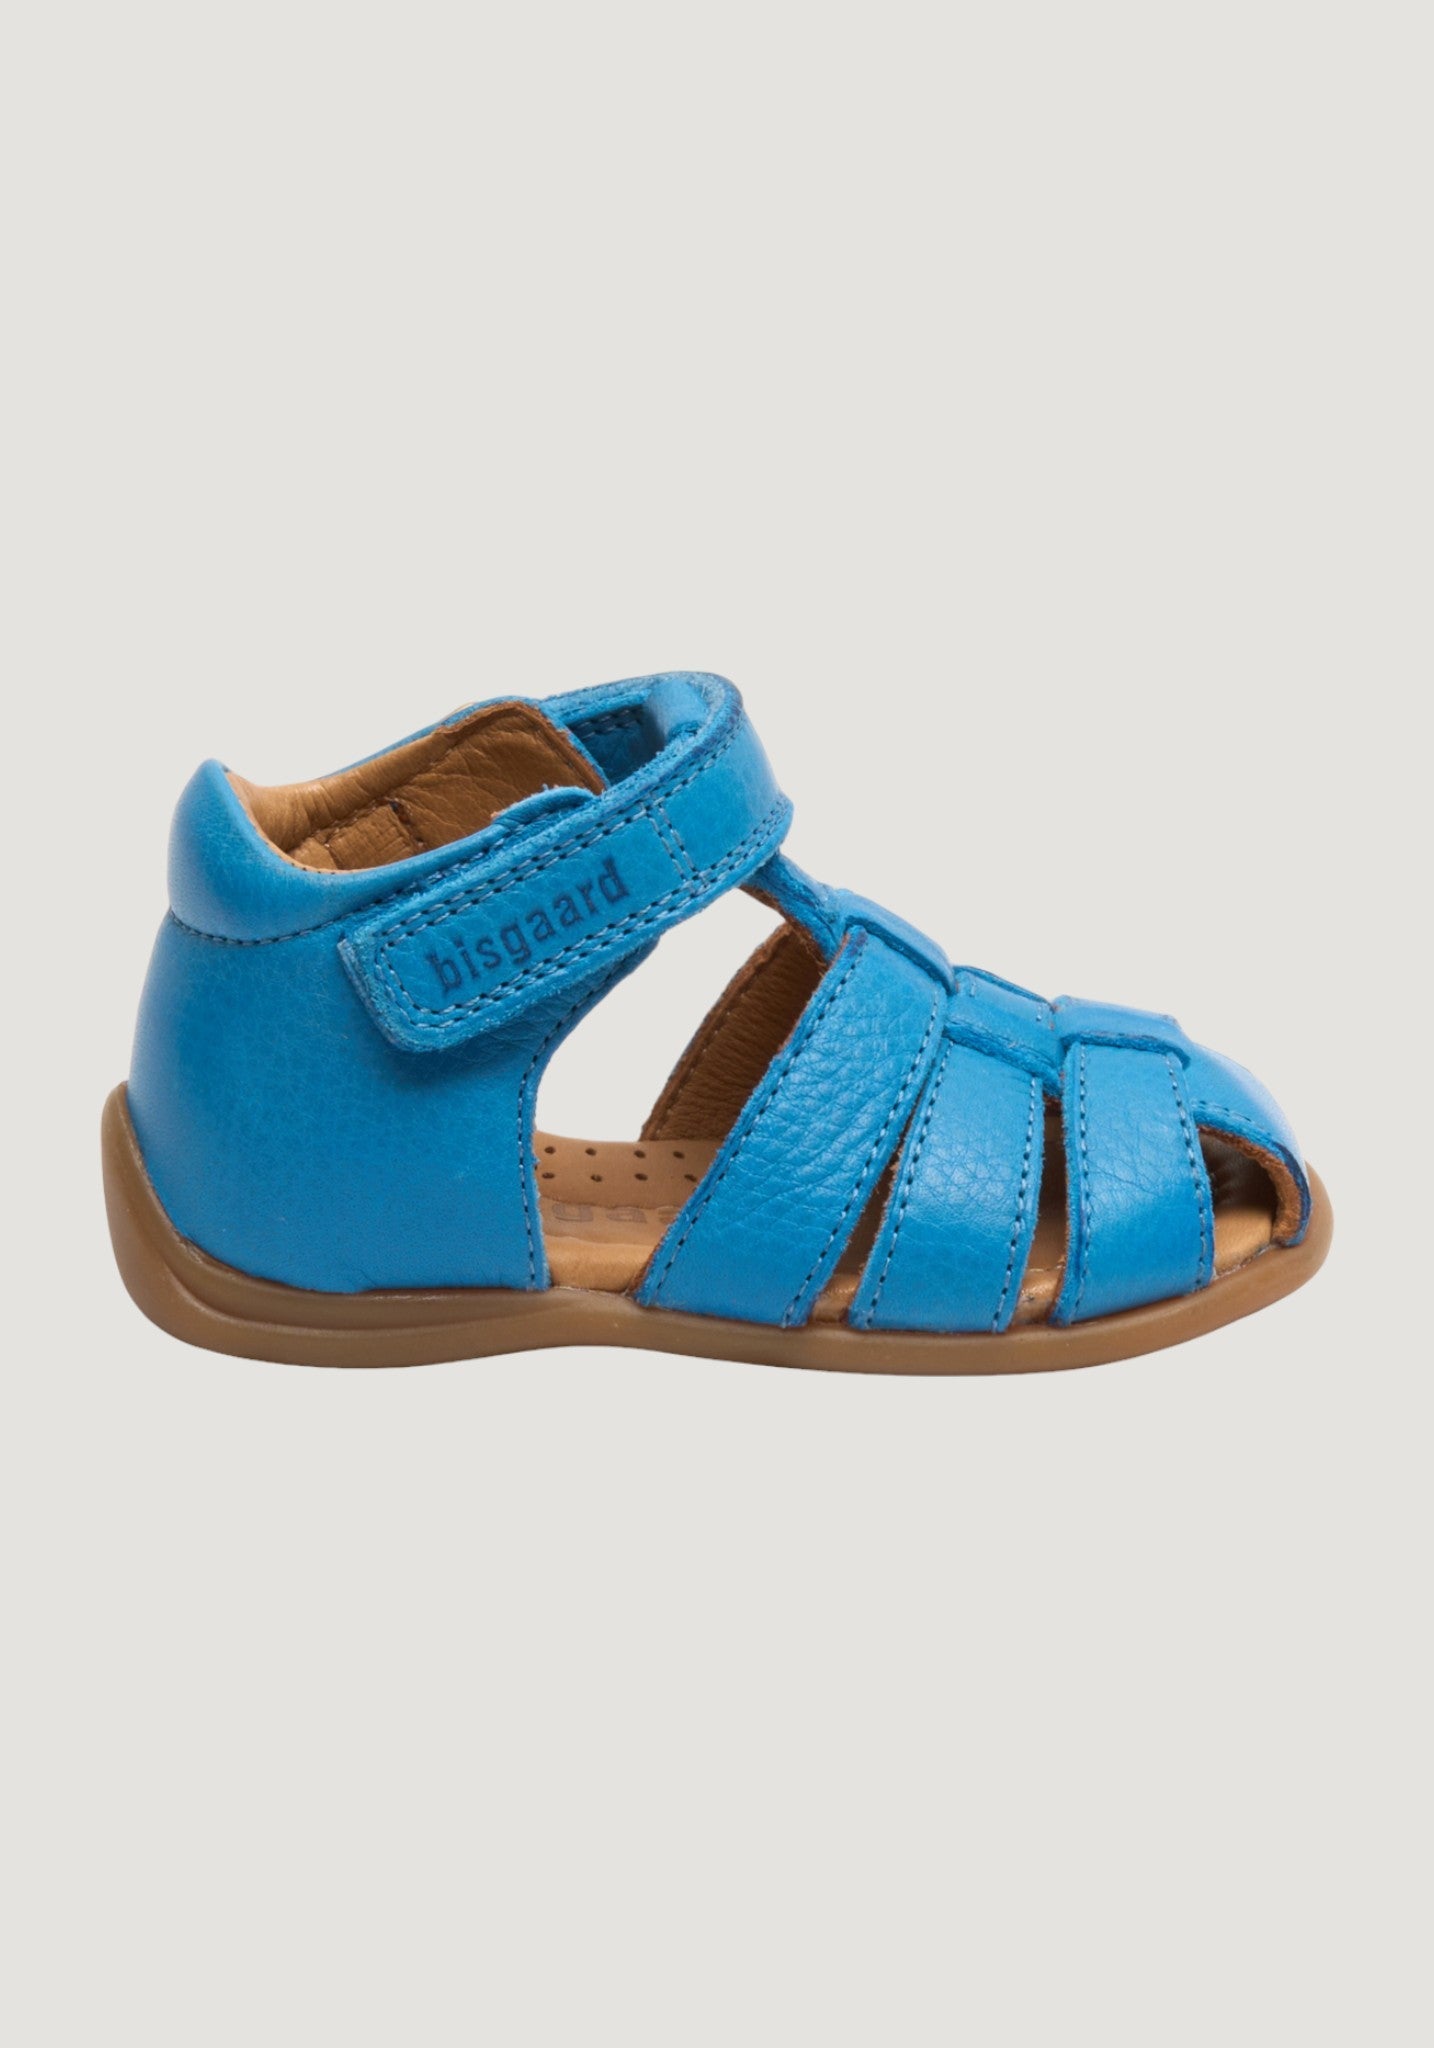 Sandale First Step piele - Carly Blue Bisgaard HipHip.ro